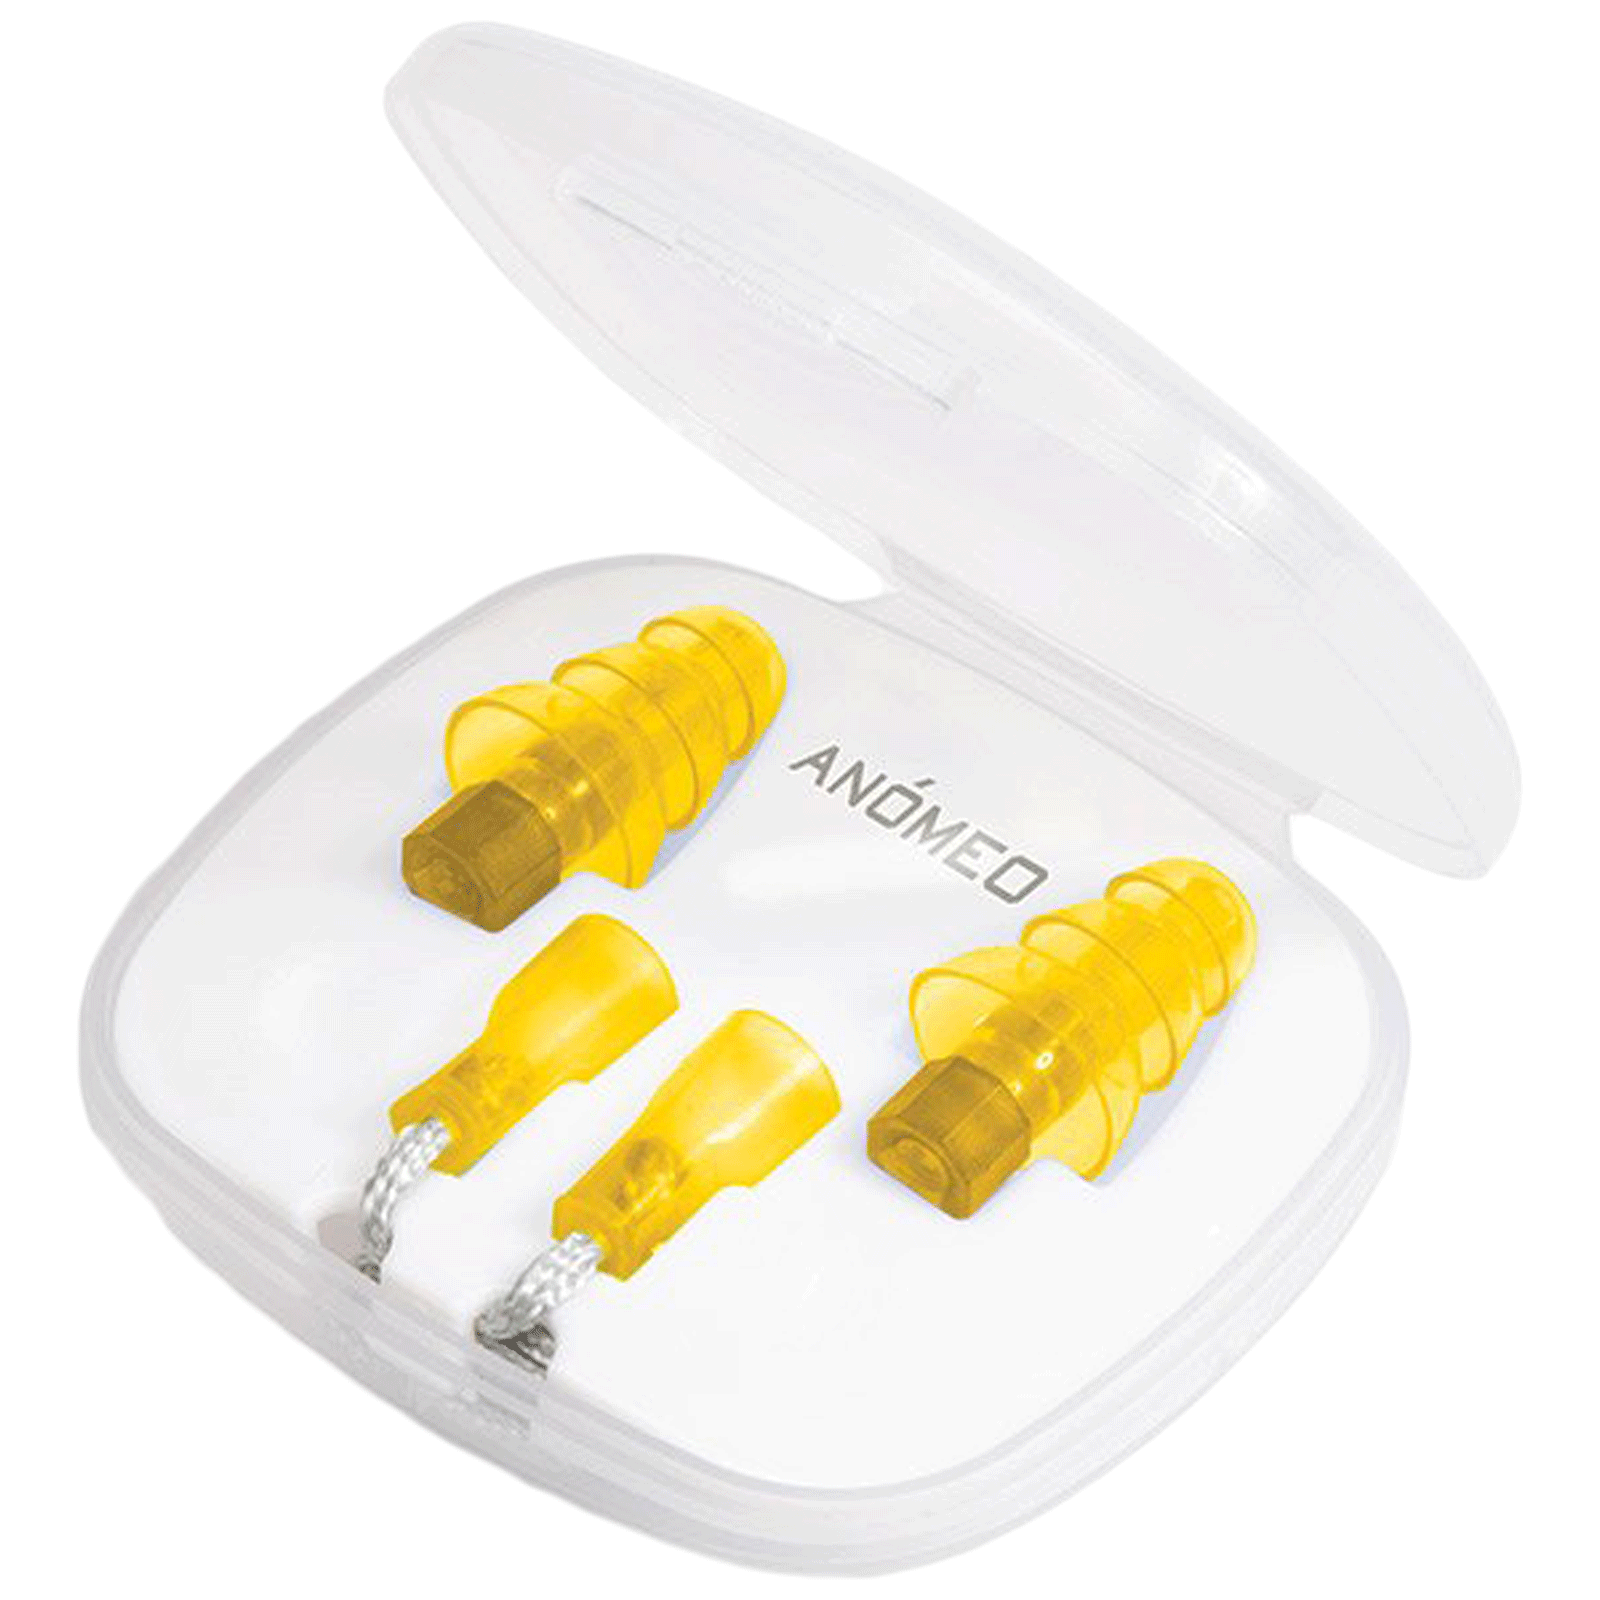 ANOMEO Professional Silicone and Polypropylene Earplugs (Cut Out Excess Sound,2427, Yellow)_1